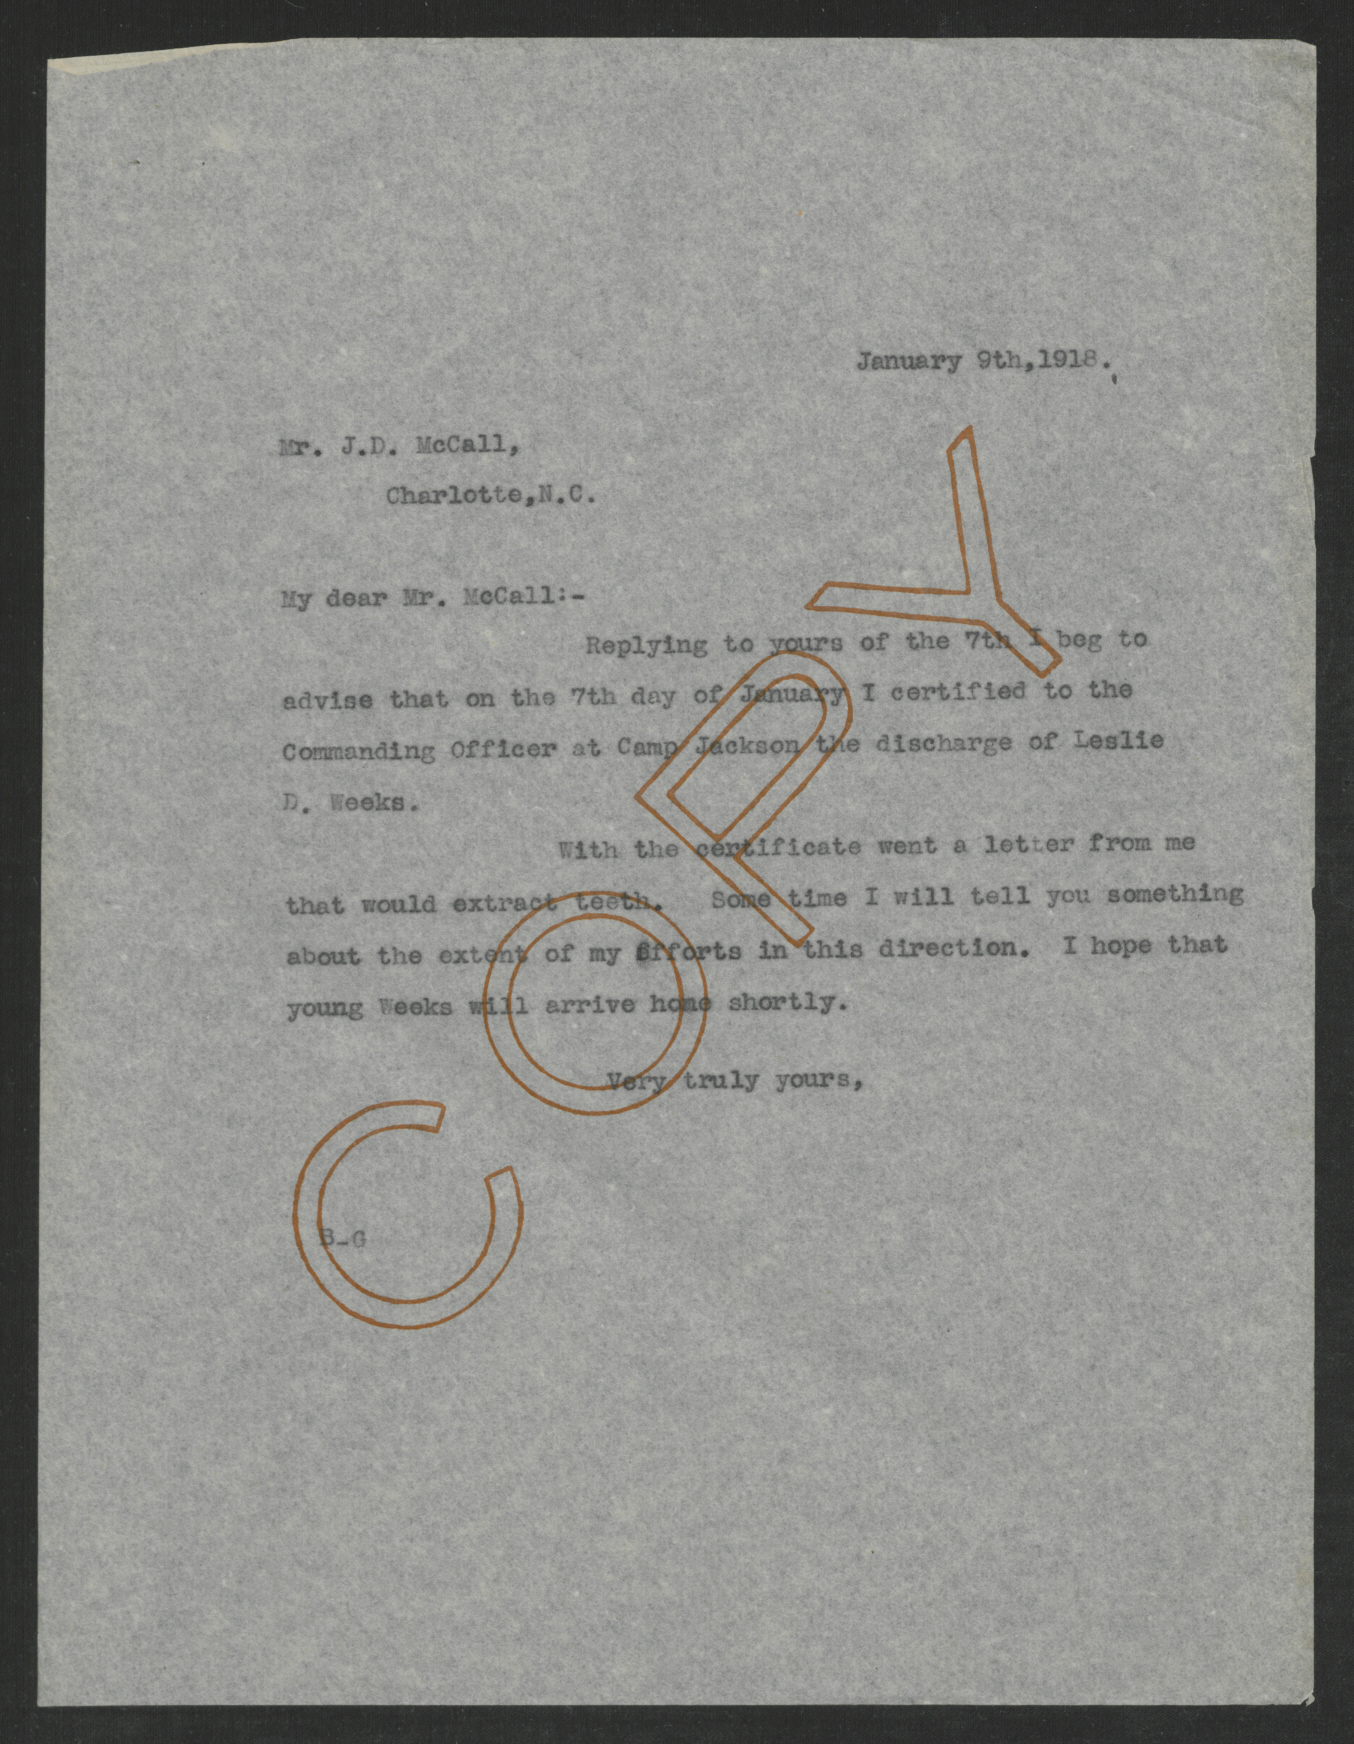 Letter from Thomas W. Bickett to Johnston D. McCall, January 9, 1918